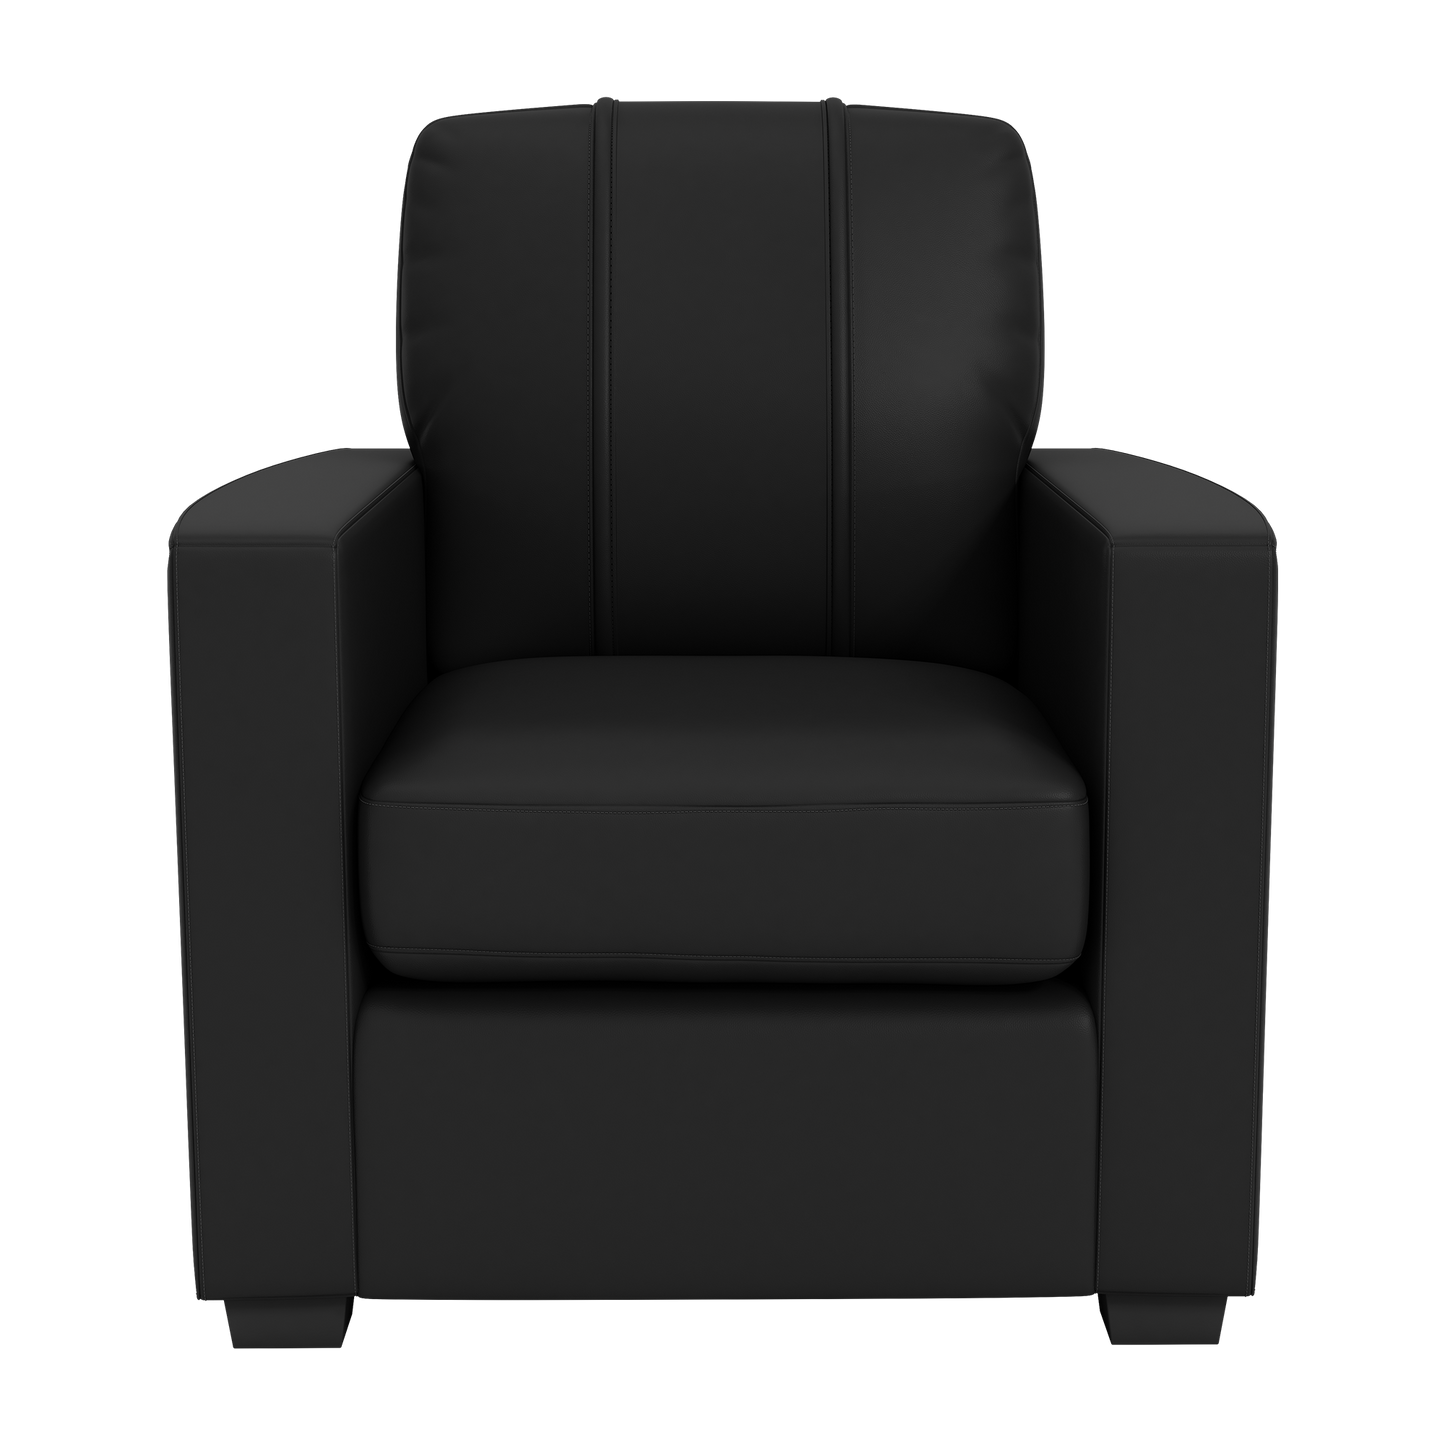 Silver Club Chair with Charlotte FC Crown Logo